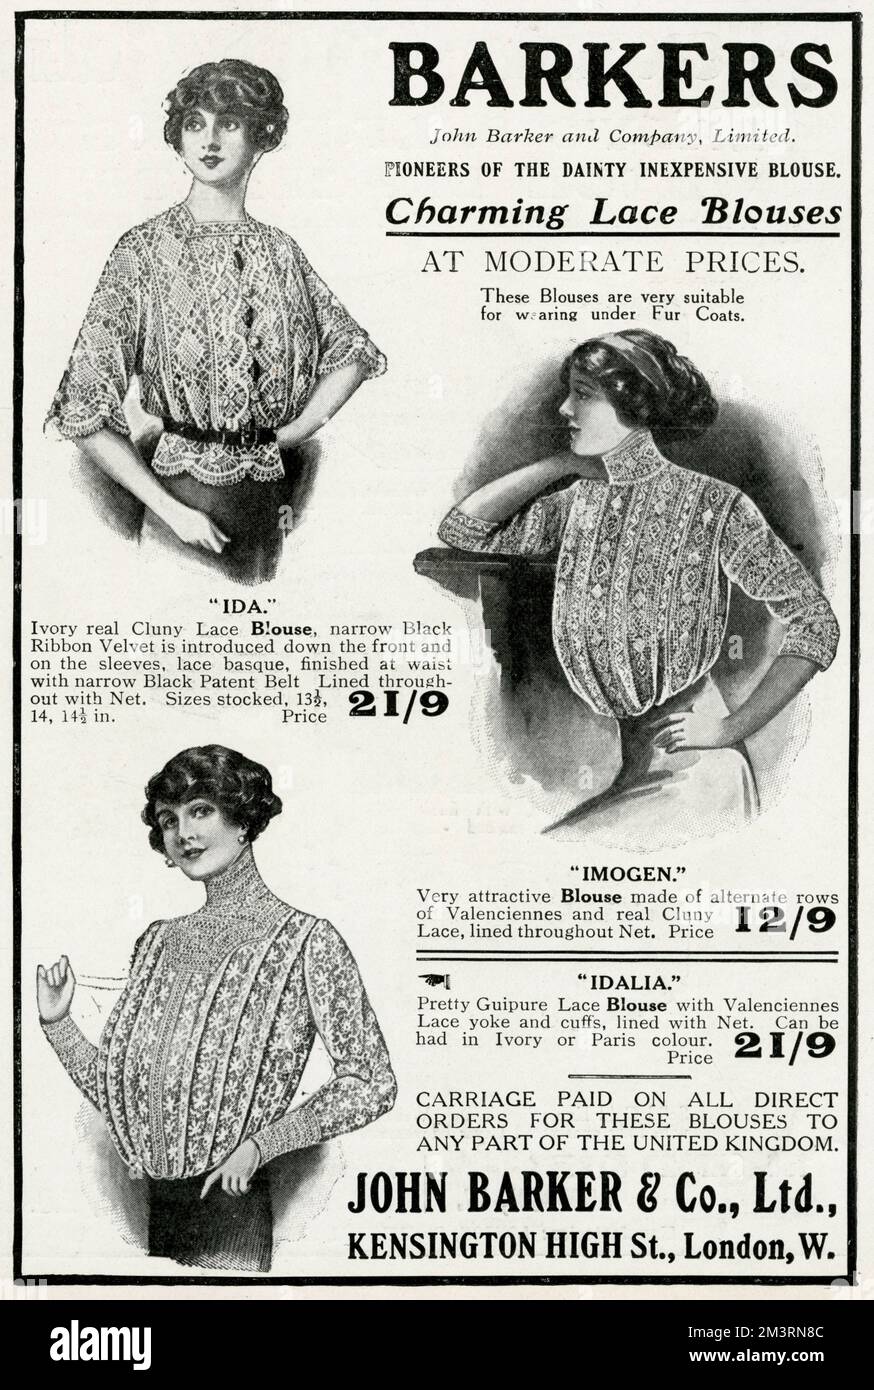 Three women wearing laced blouses, in ivory with black ribbon velvet introduced down the front and scallop edging, high neck of alternate rows of Valenciennes lined thoughout the net, Guipure lace blouse with Valenciennes lace yoke and cuffs lined in net.  1912 Stock Photo